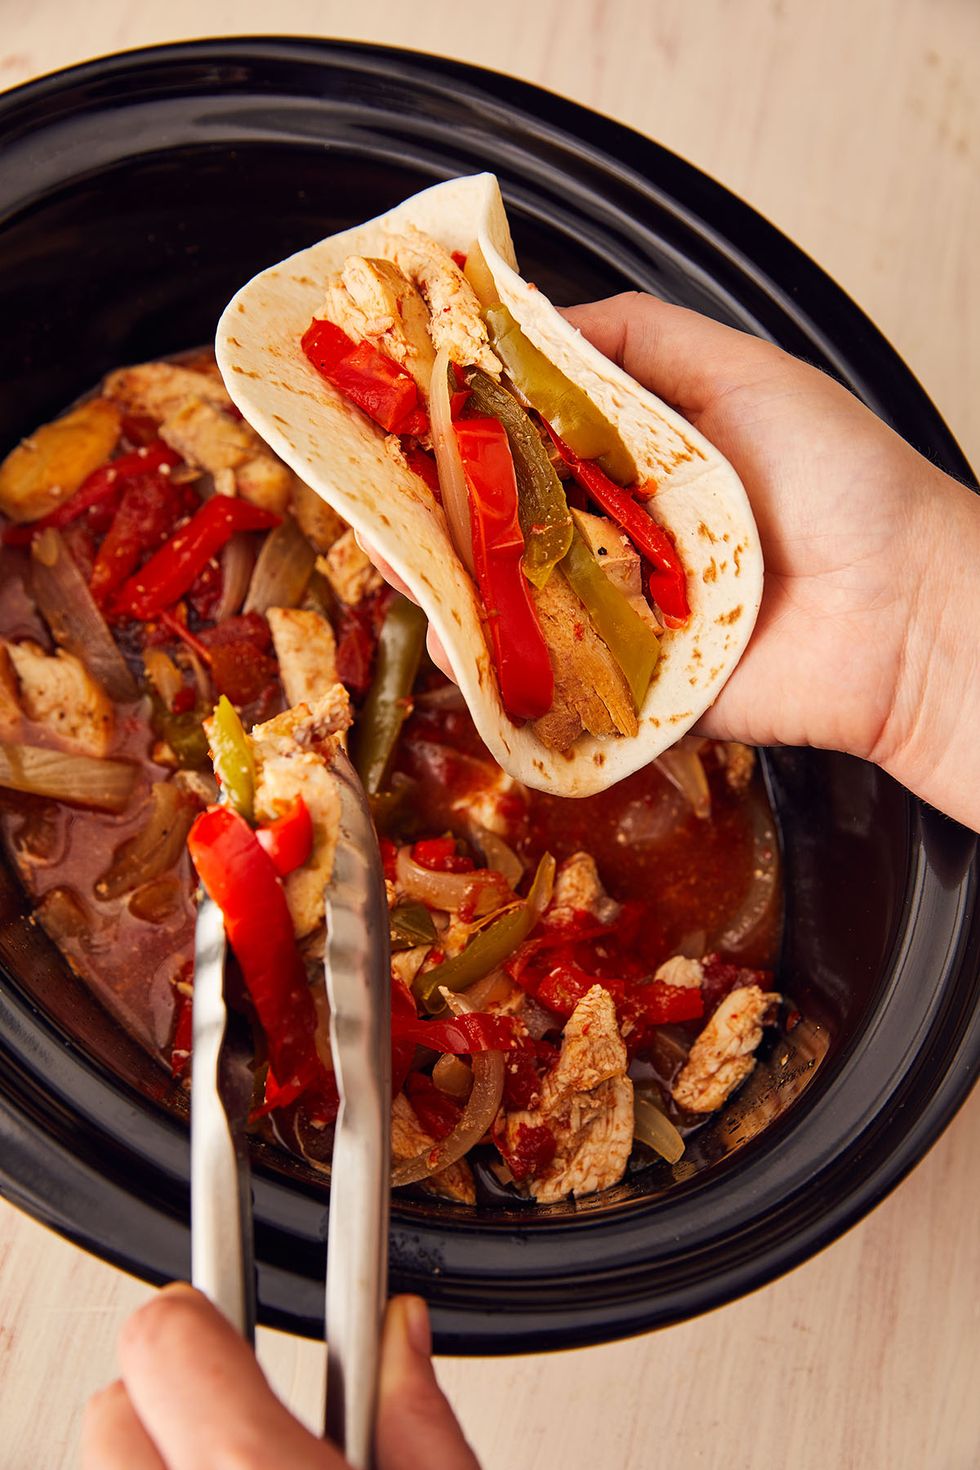 15 Best Crock-Pot Recipes for Two - Slow Cooker Dinners for Two